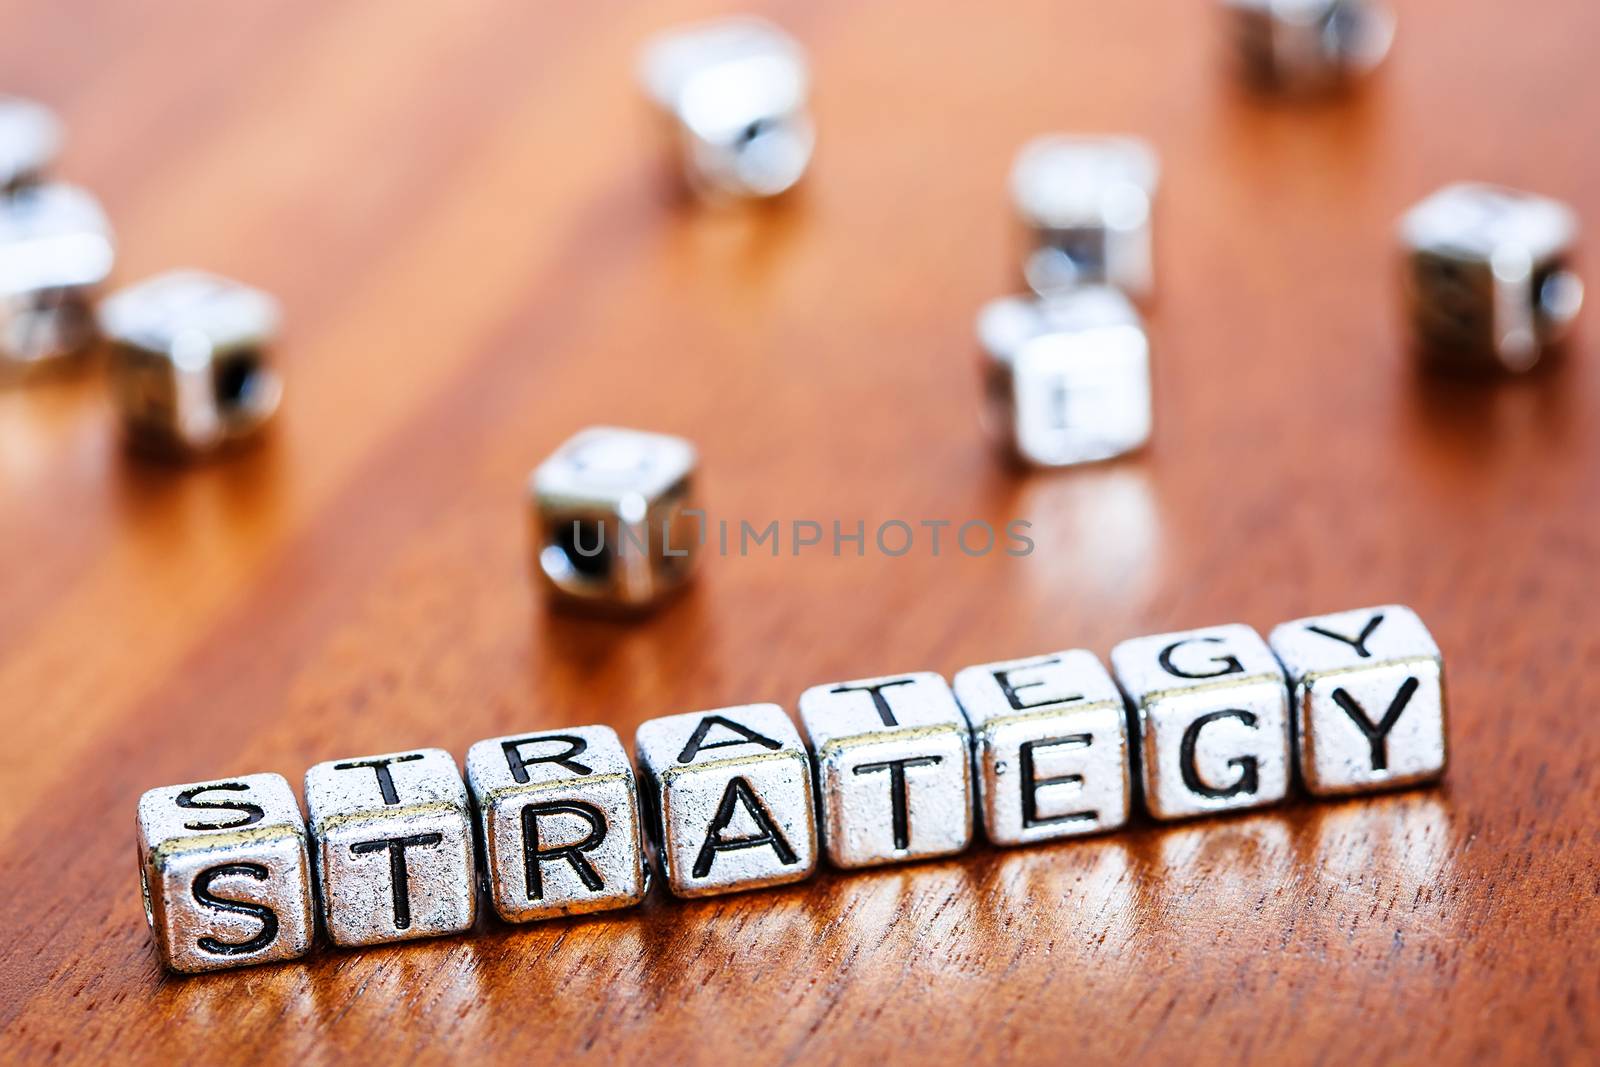 strategy concept business marketing letters placed on a desk in precious wood